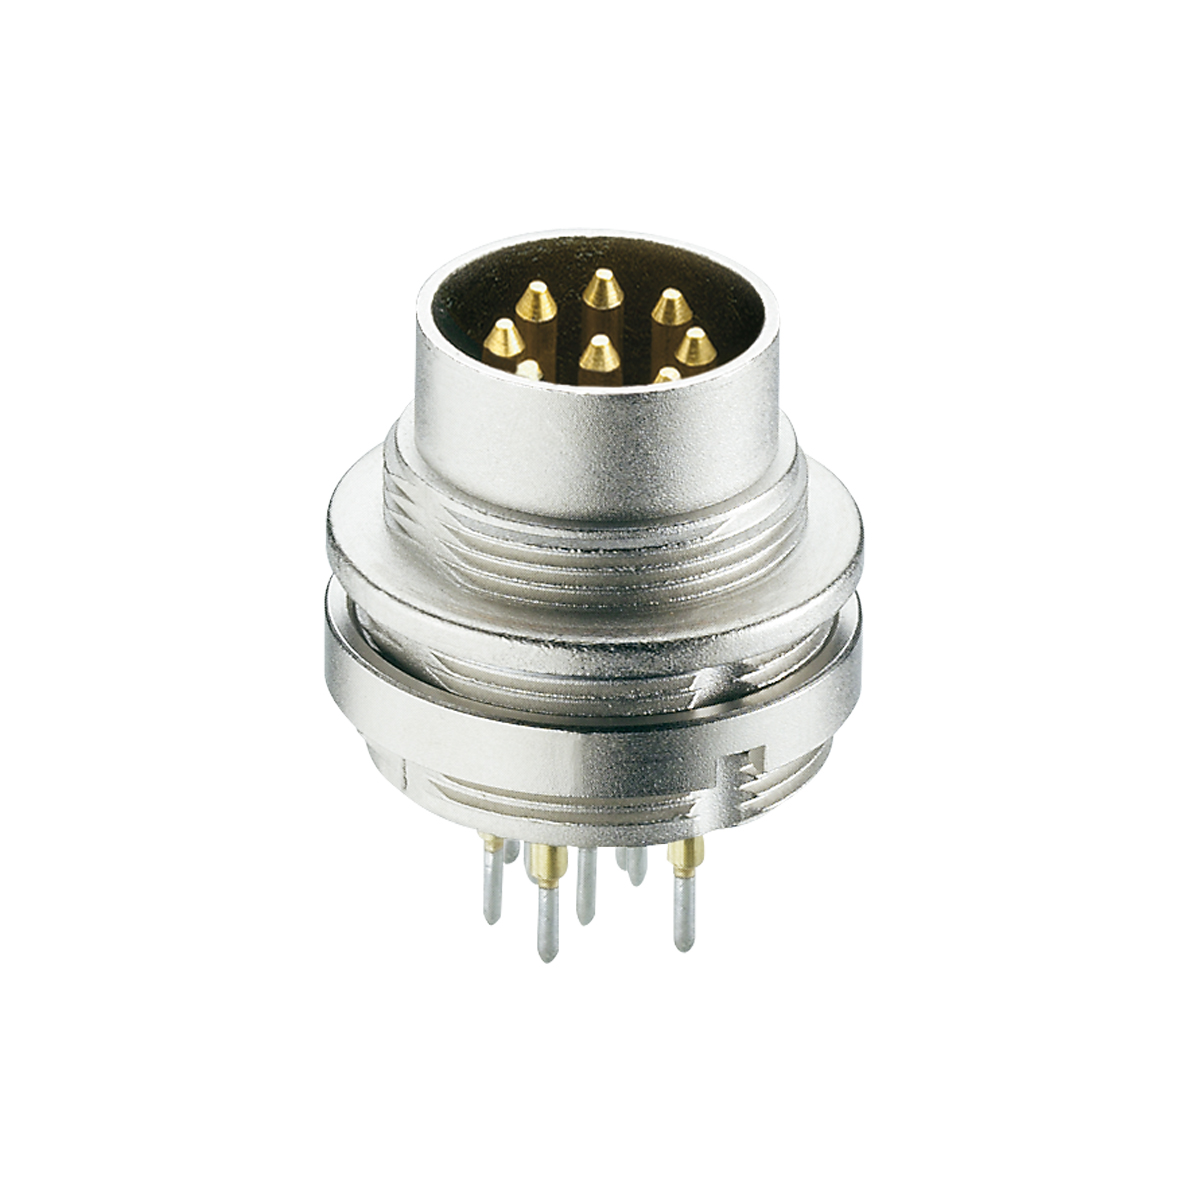 Lumberg: 0316-2 (Series 03 | Circular connectors with threaded joint M16 acc. to IEC 61076-2-106, IP40/IP68)